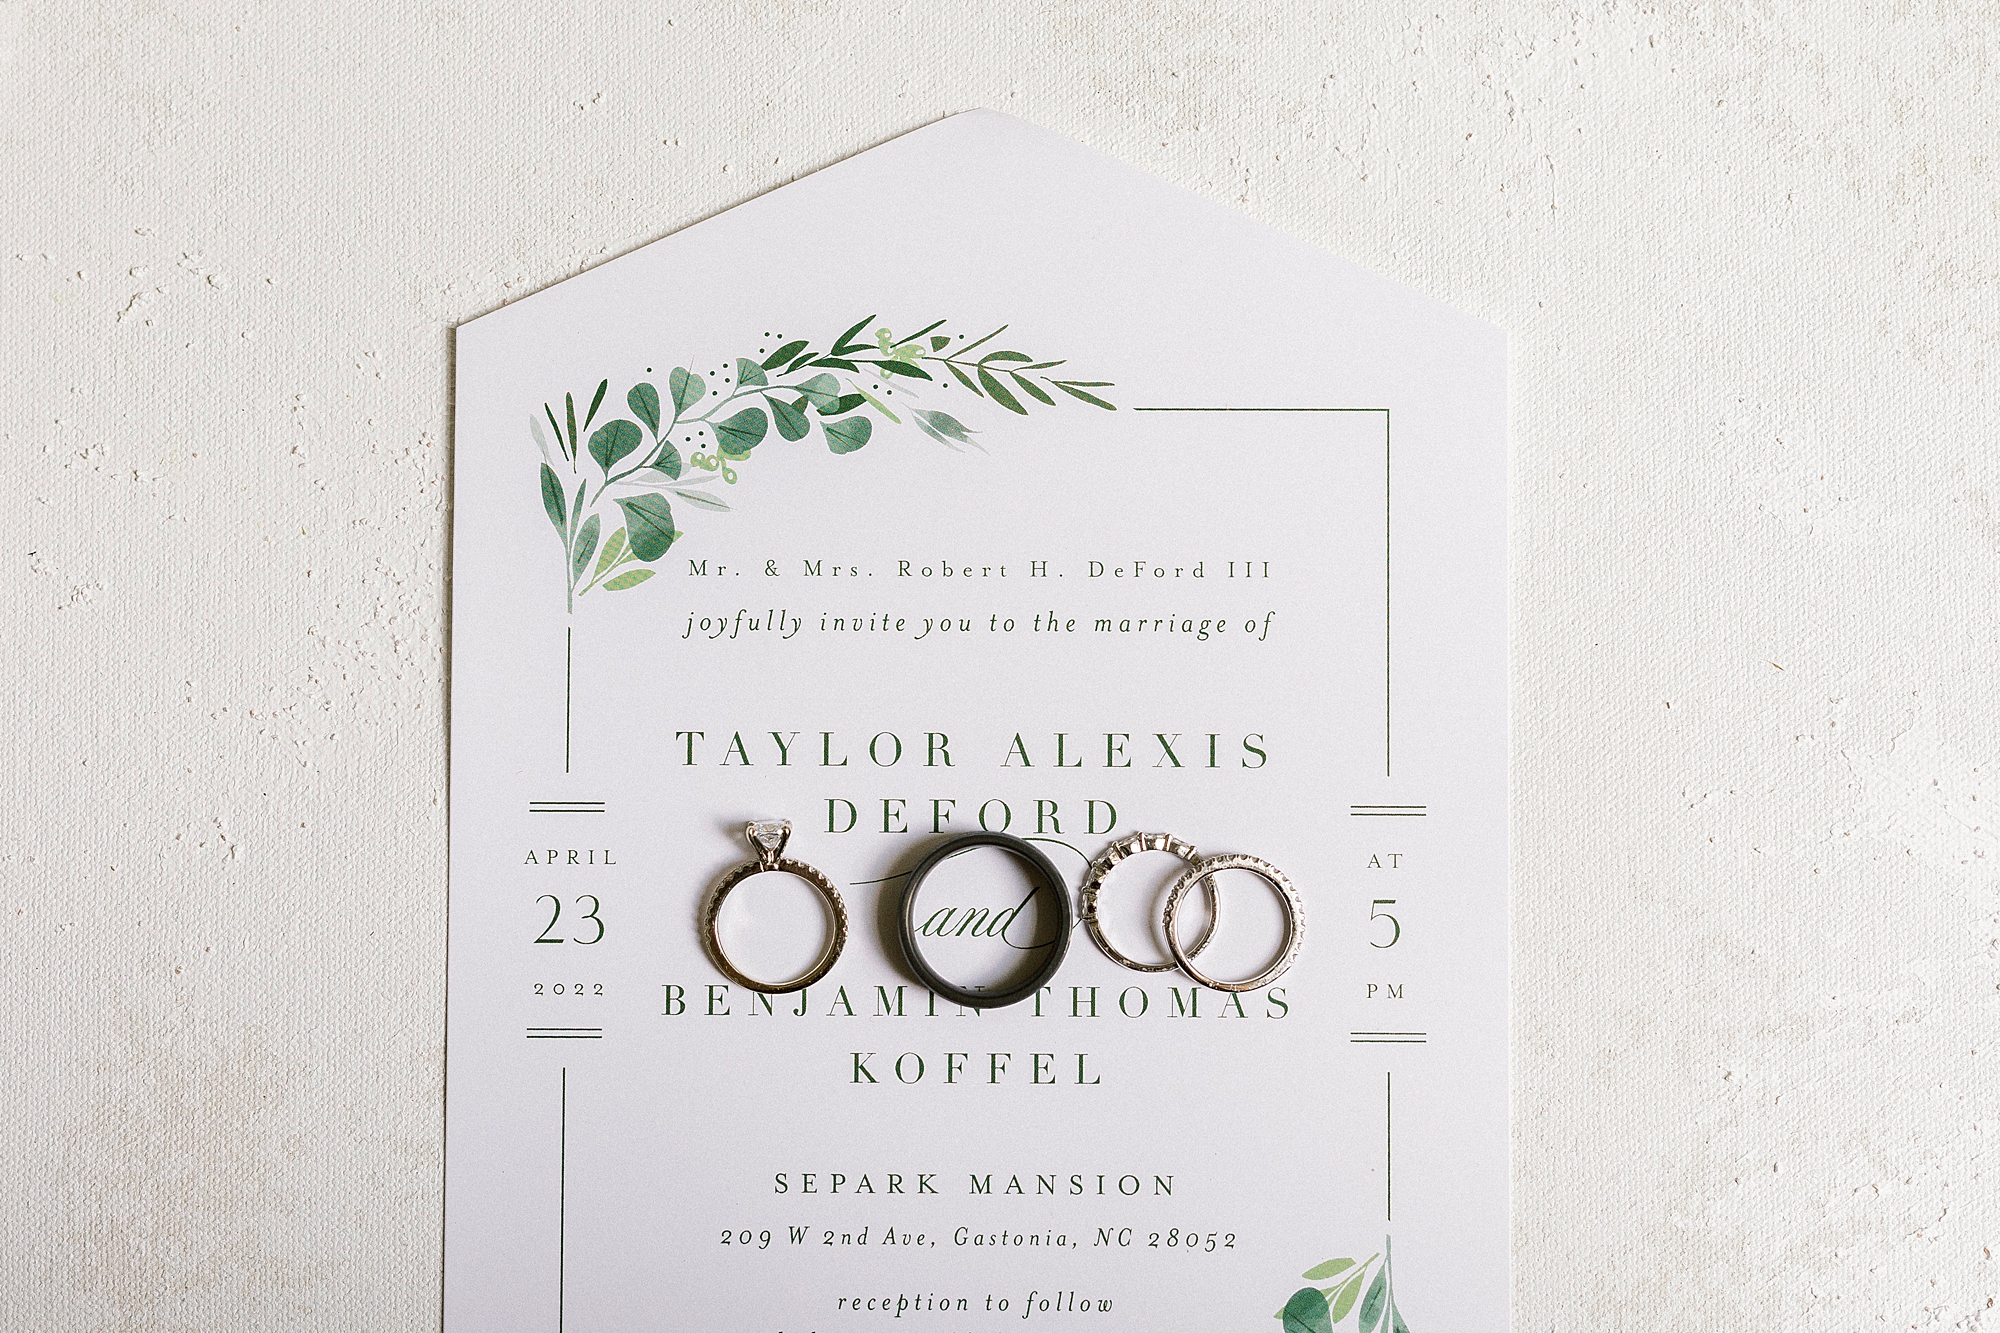 classic invitation suite for Separk Mansion wedding day